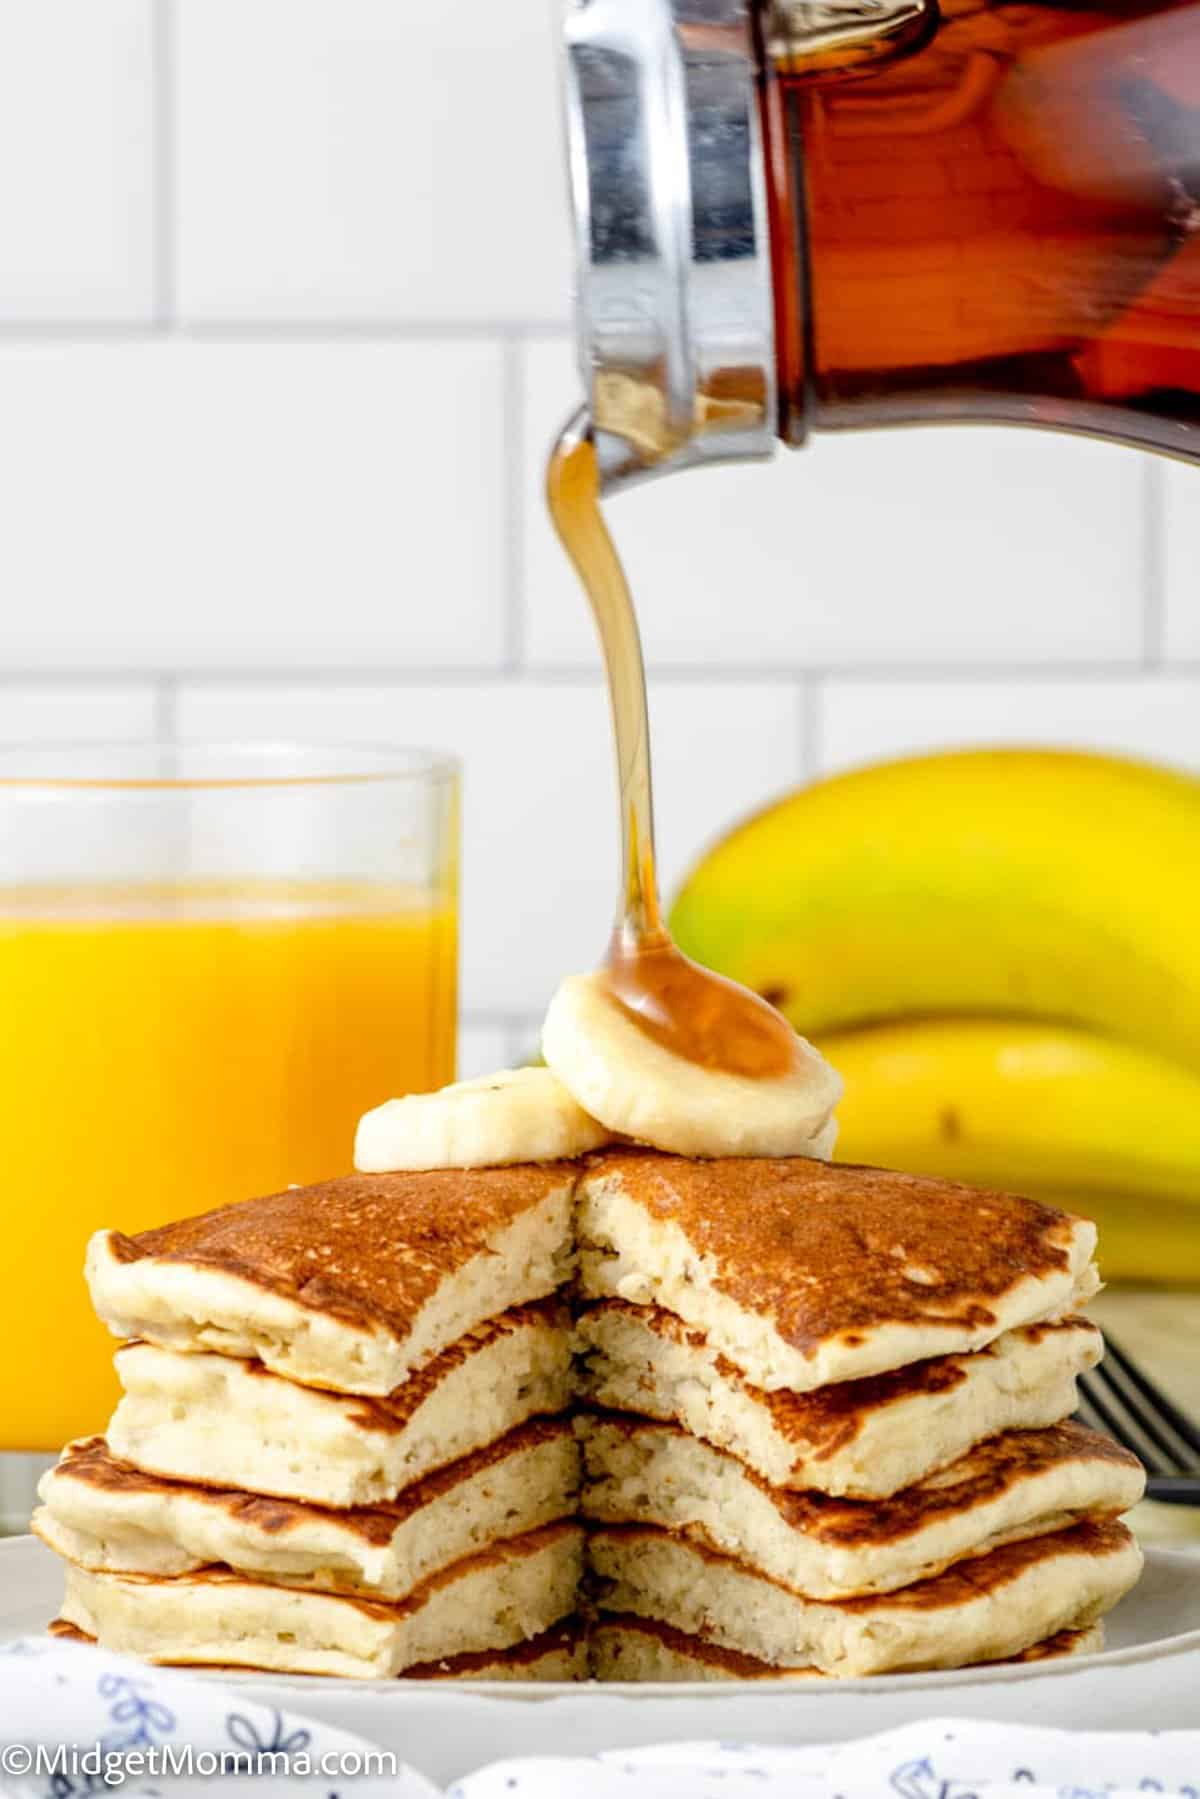 maple syrup being poured on top of banana pancakes